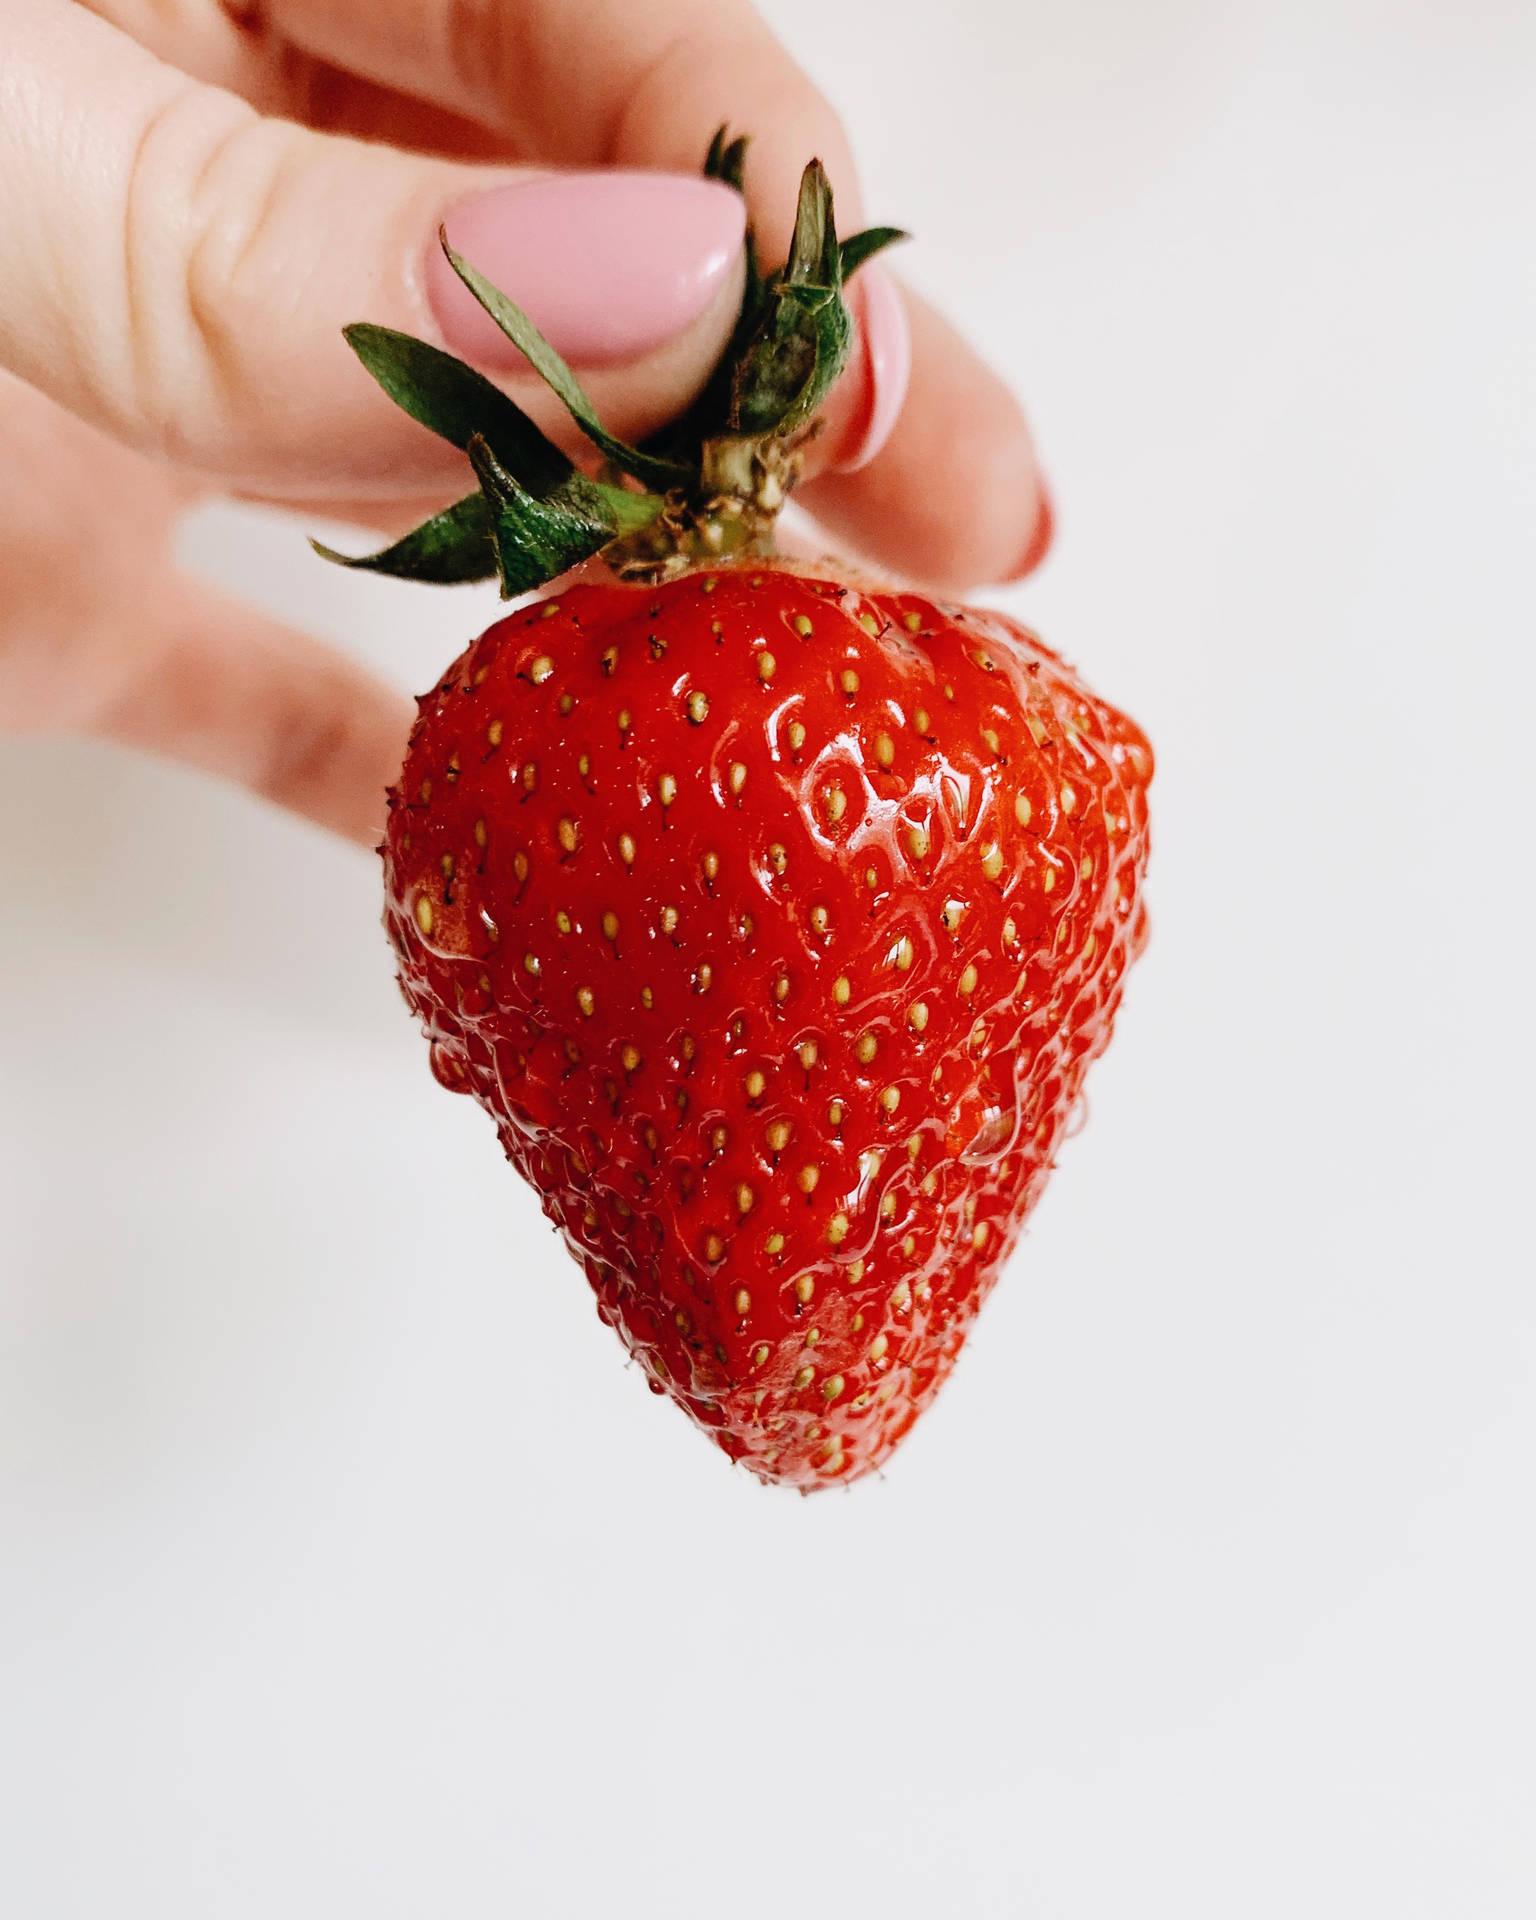 Strawberry Fruit Held By Hand Background